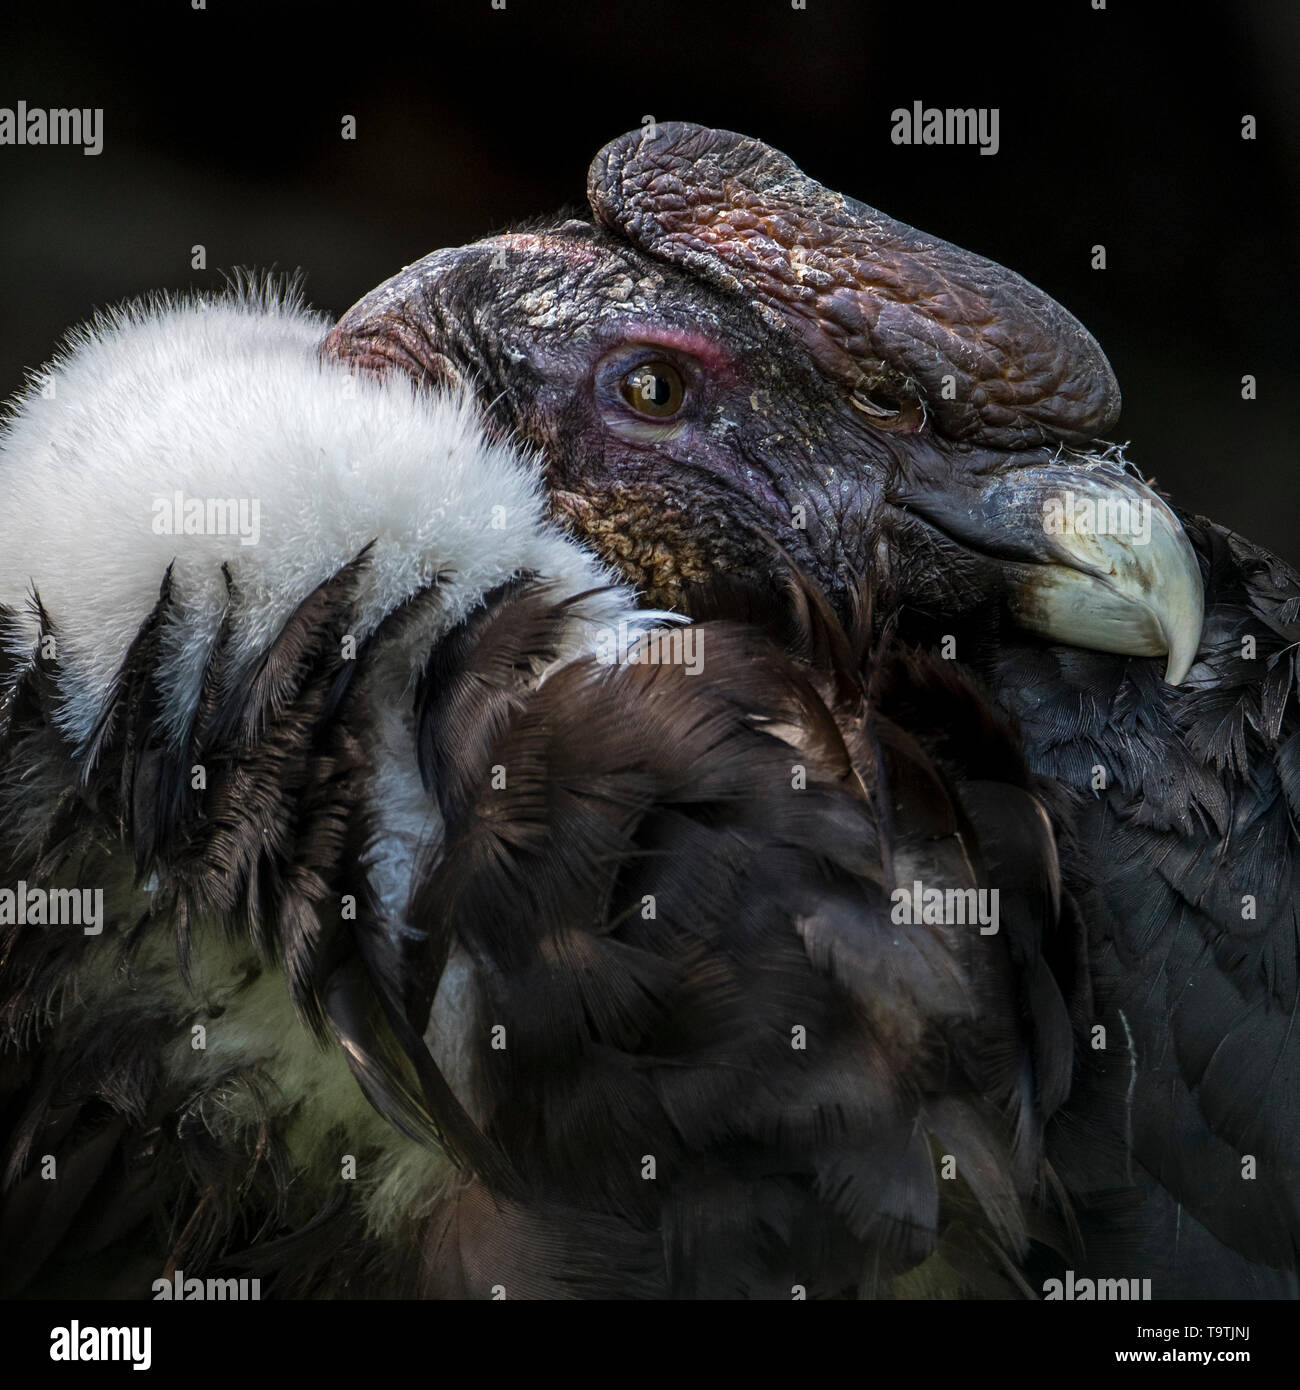 Andean condor / Chilean condor (Vultur gryphus),  New World vulture native to the Andes, South America Stock Photo